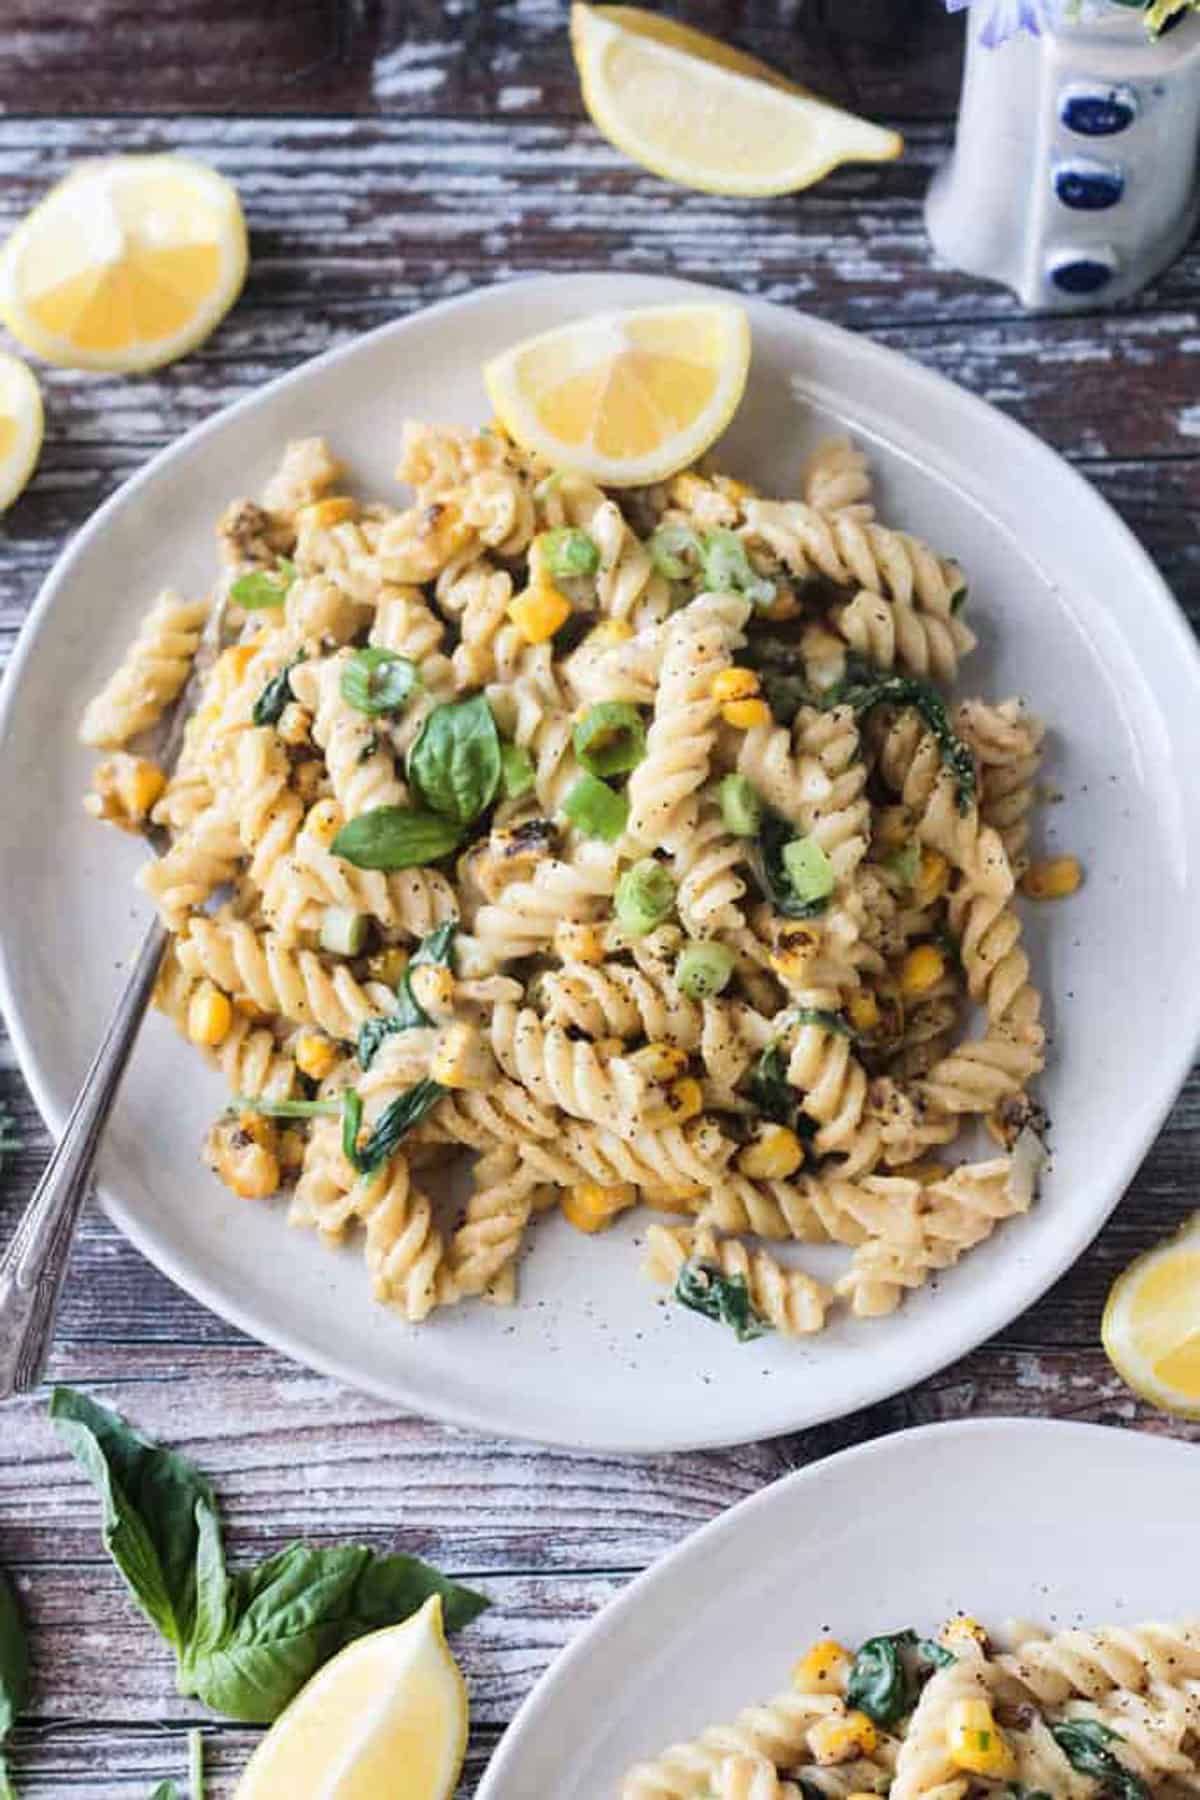 Plate of creamy sweet corn pasta topped with basil leaves.